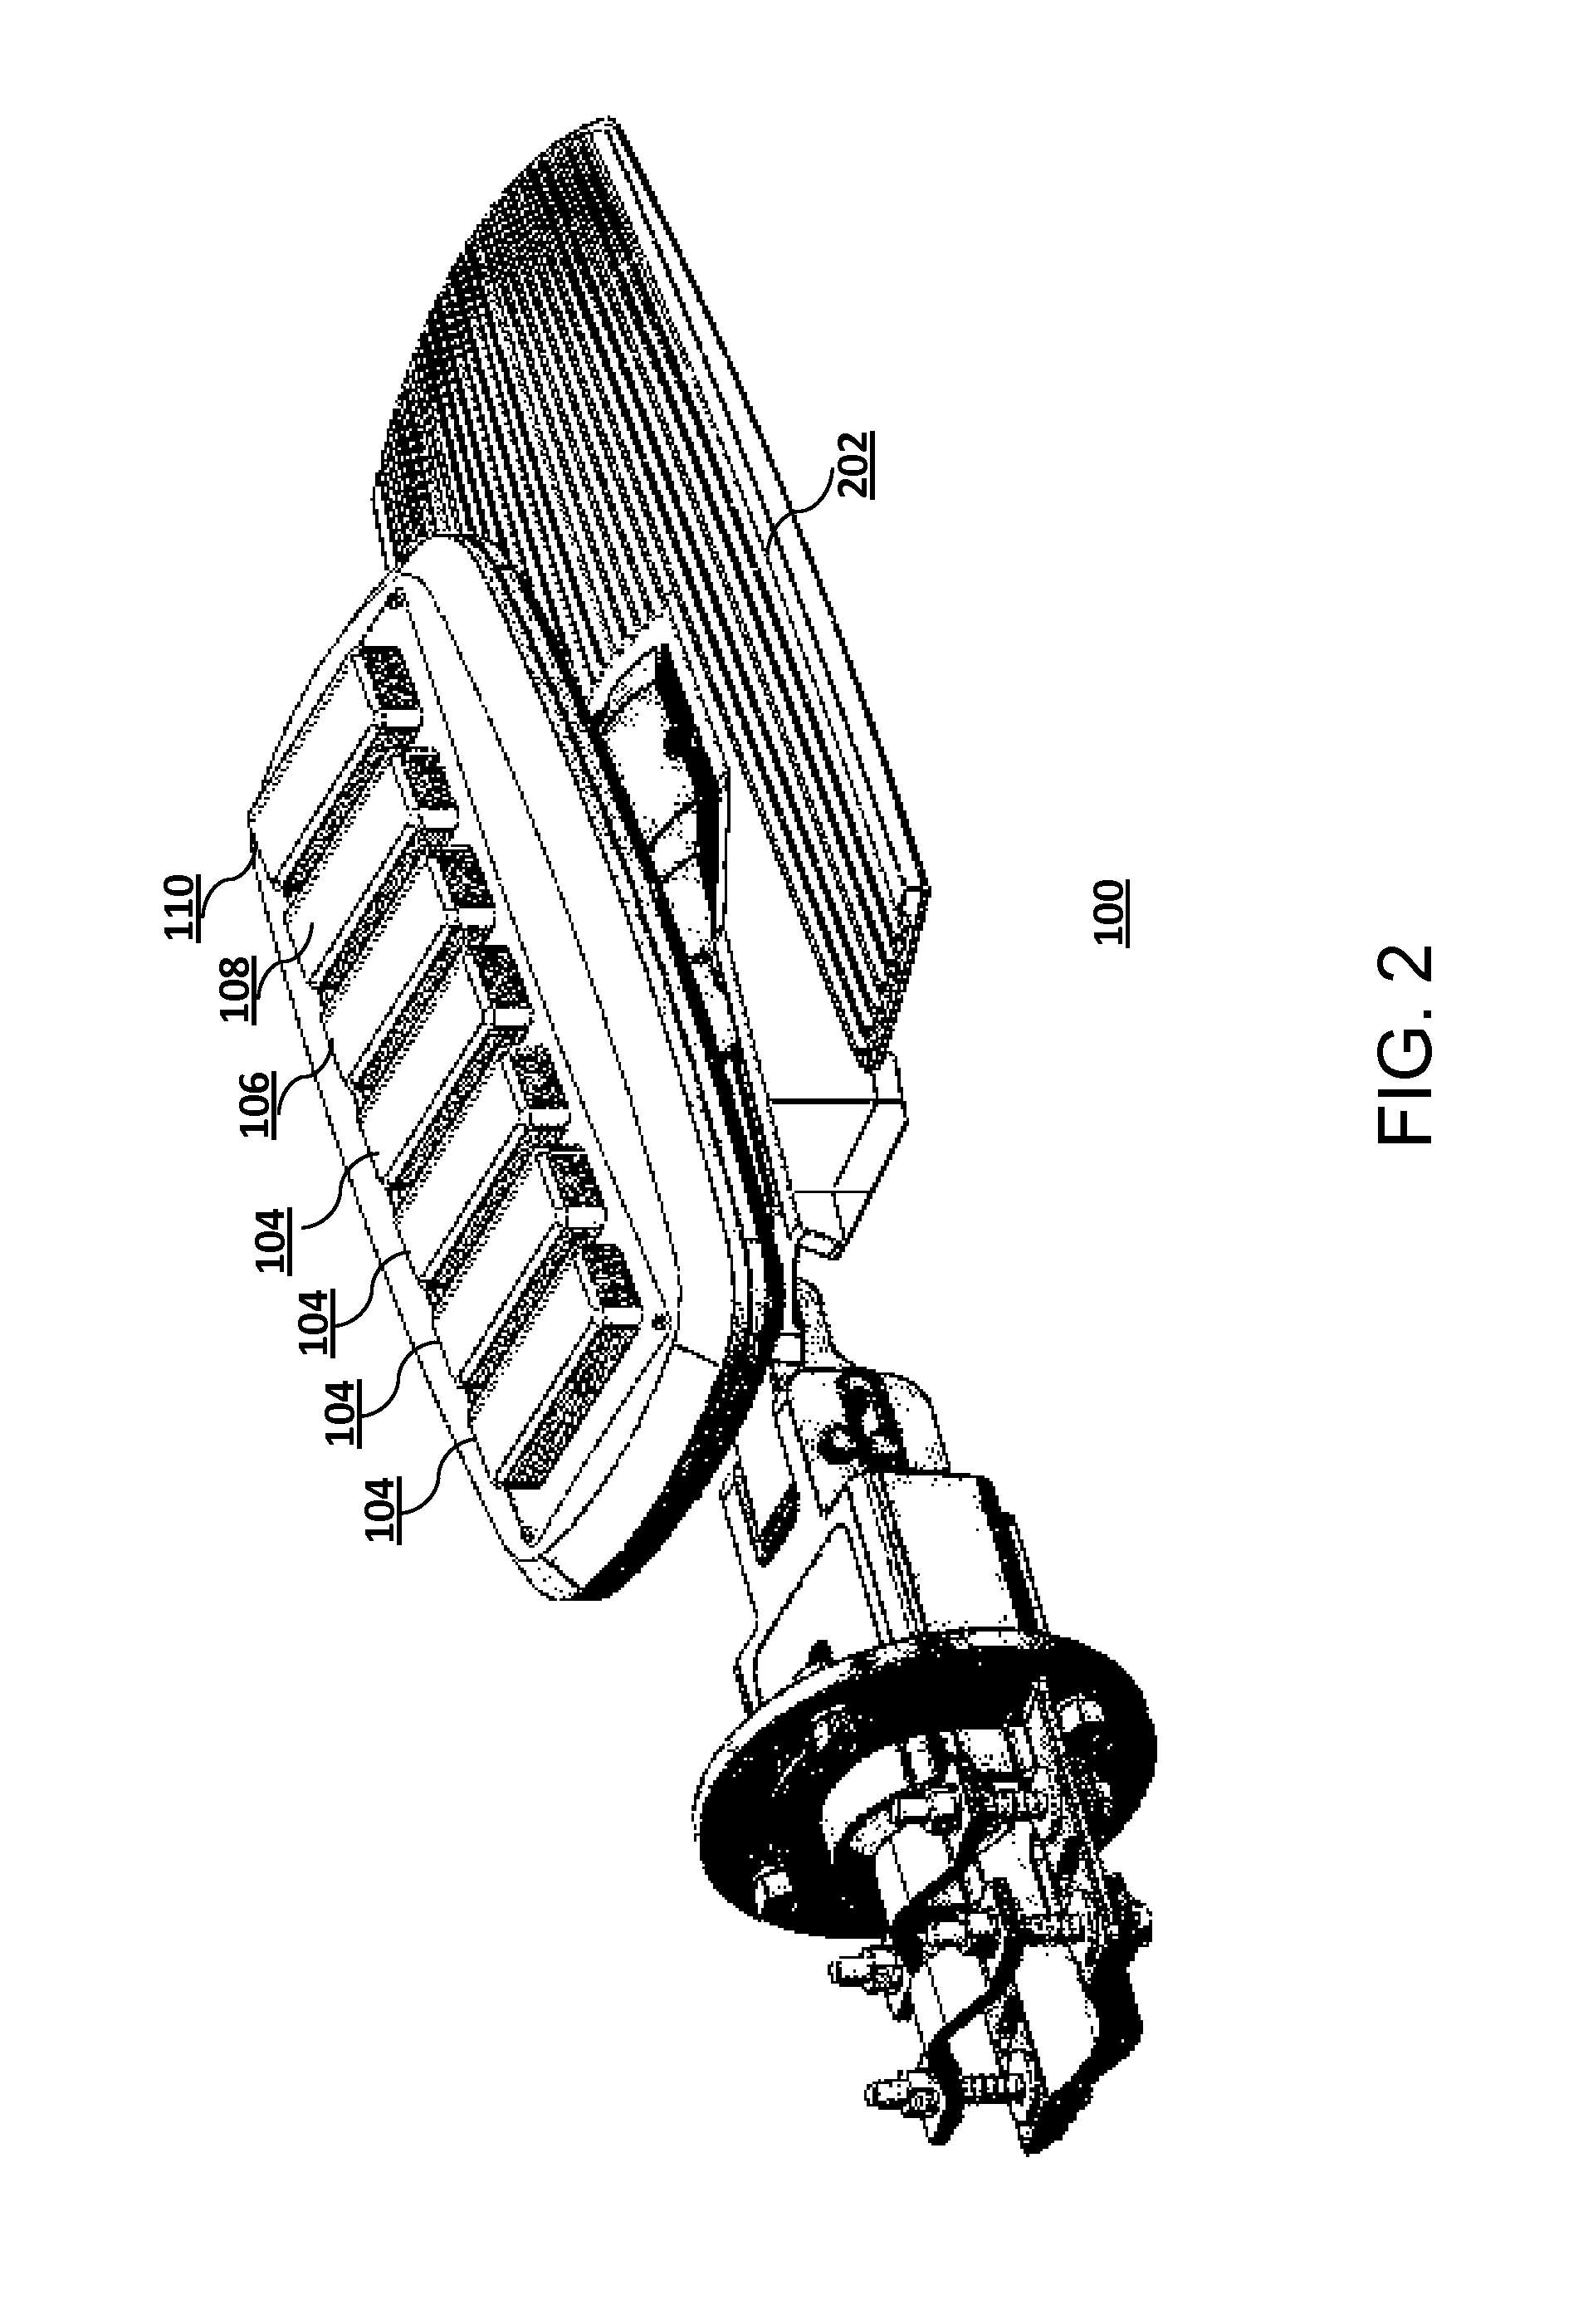 Systems and methods for modular and configurable driver system for LED lighting devices